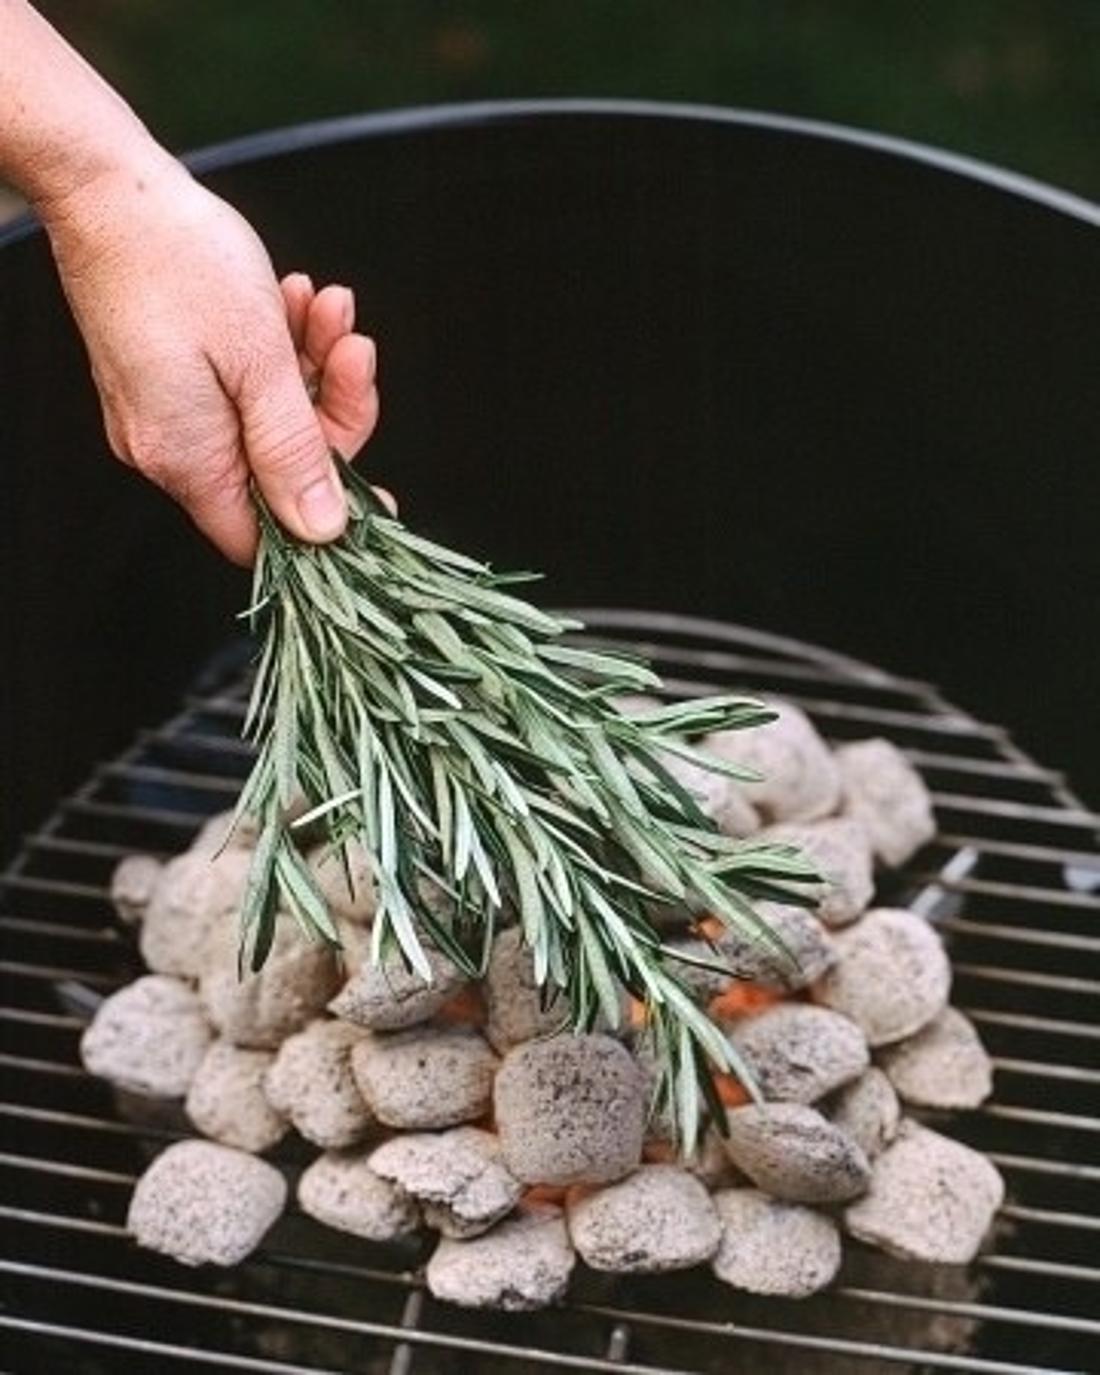 Forgo the meat marinade and put the rosemary on the coals.